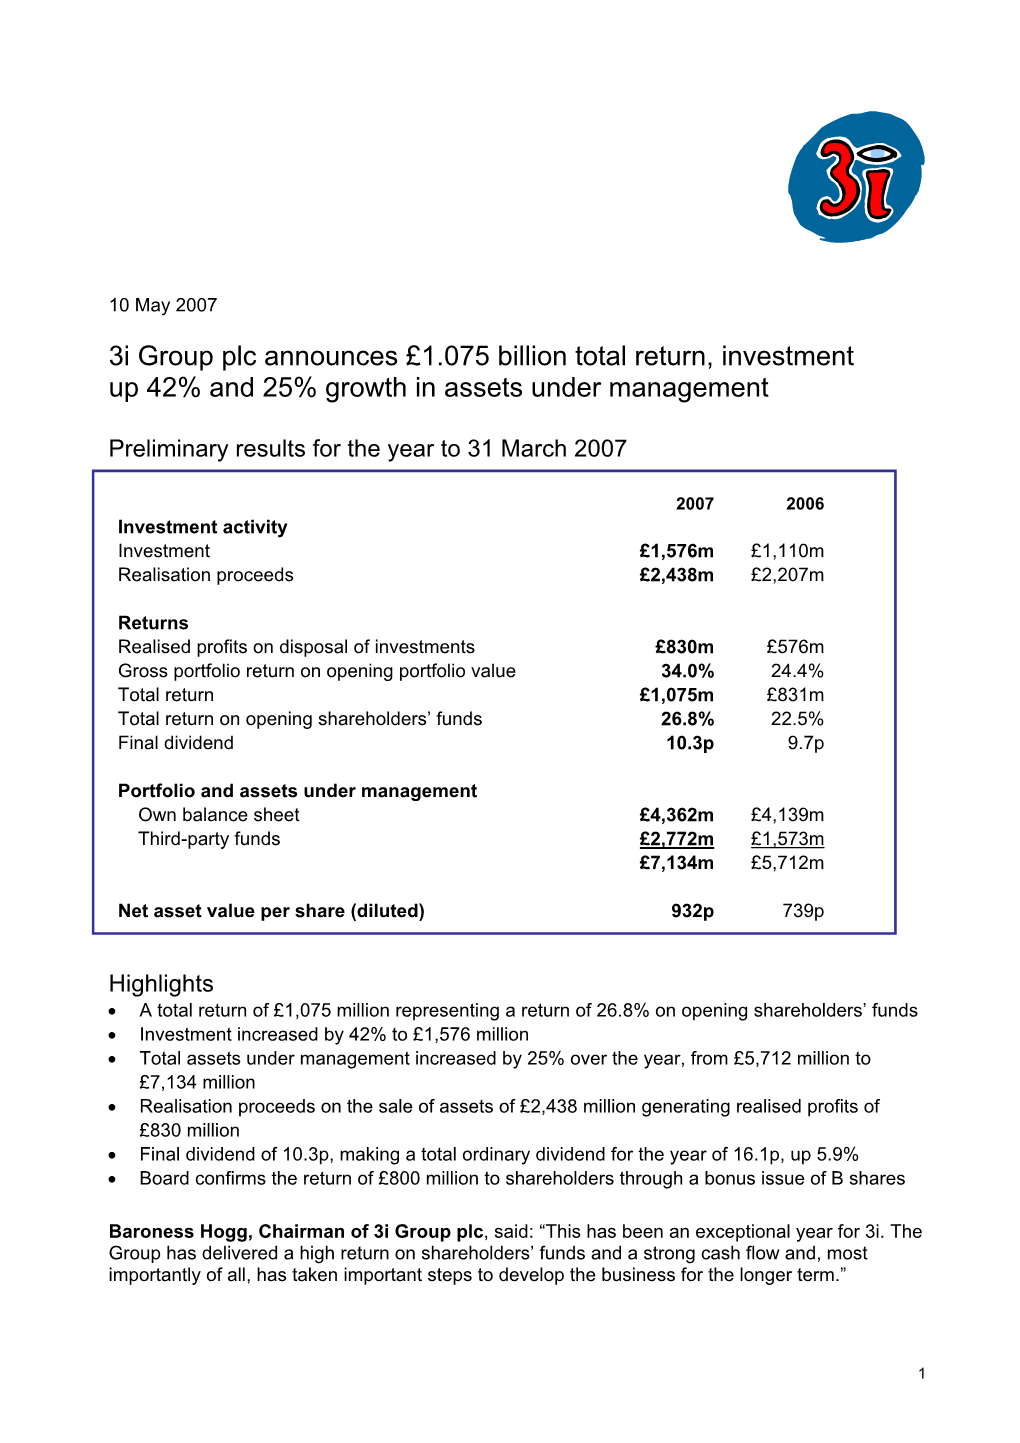 3I Group Plc Announces £1.075 Billion Total Return, Investment up 42% and 25% Growth in Assets Under Management